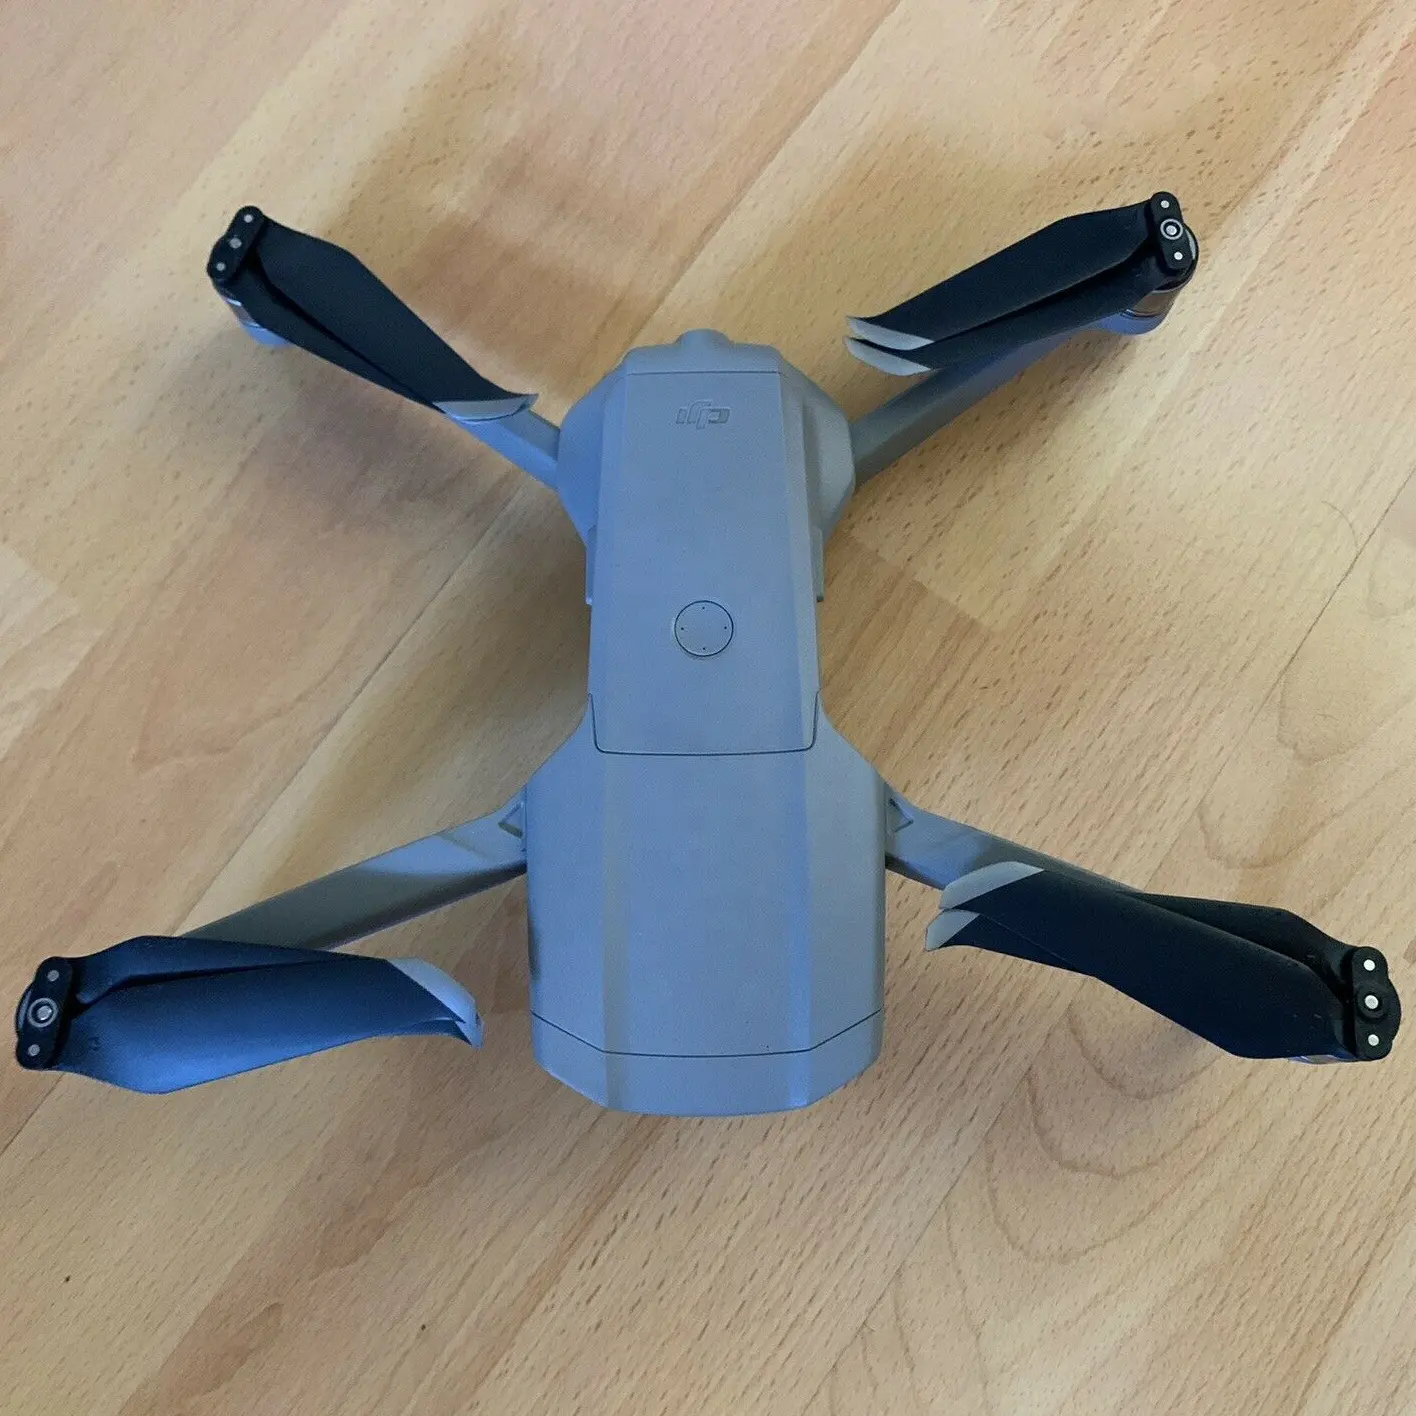 Cheap price for 100% Original and New for DJI Mavic Air 2 Fly More Combo